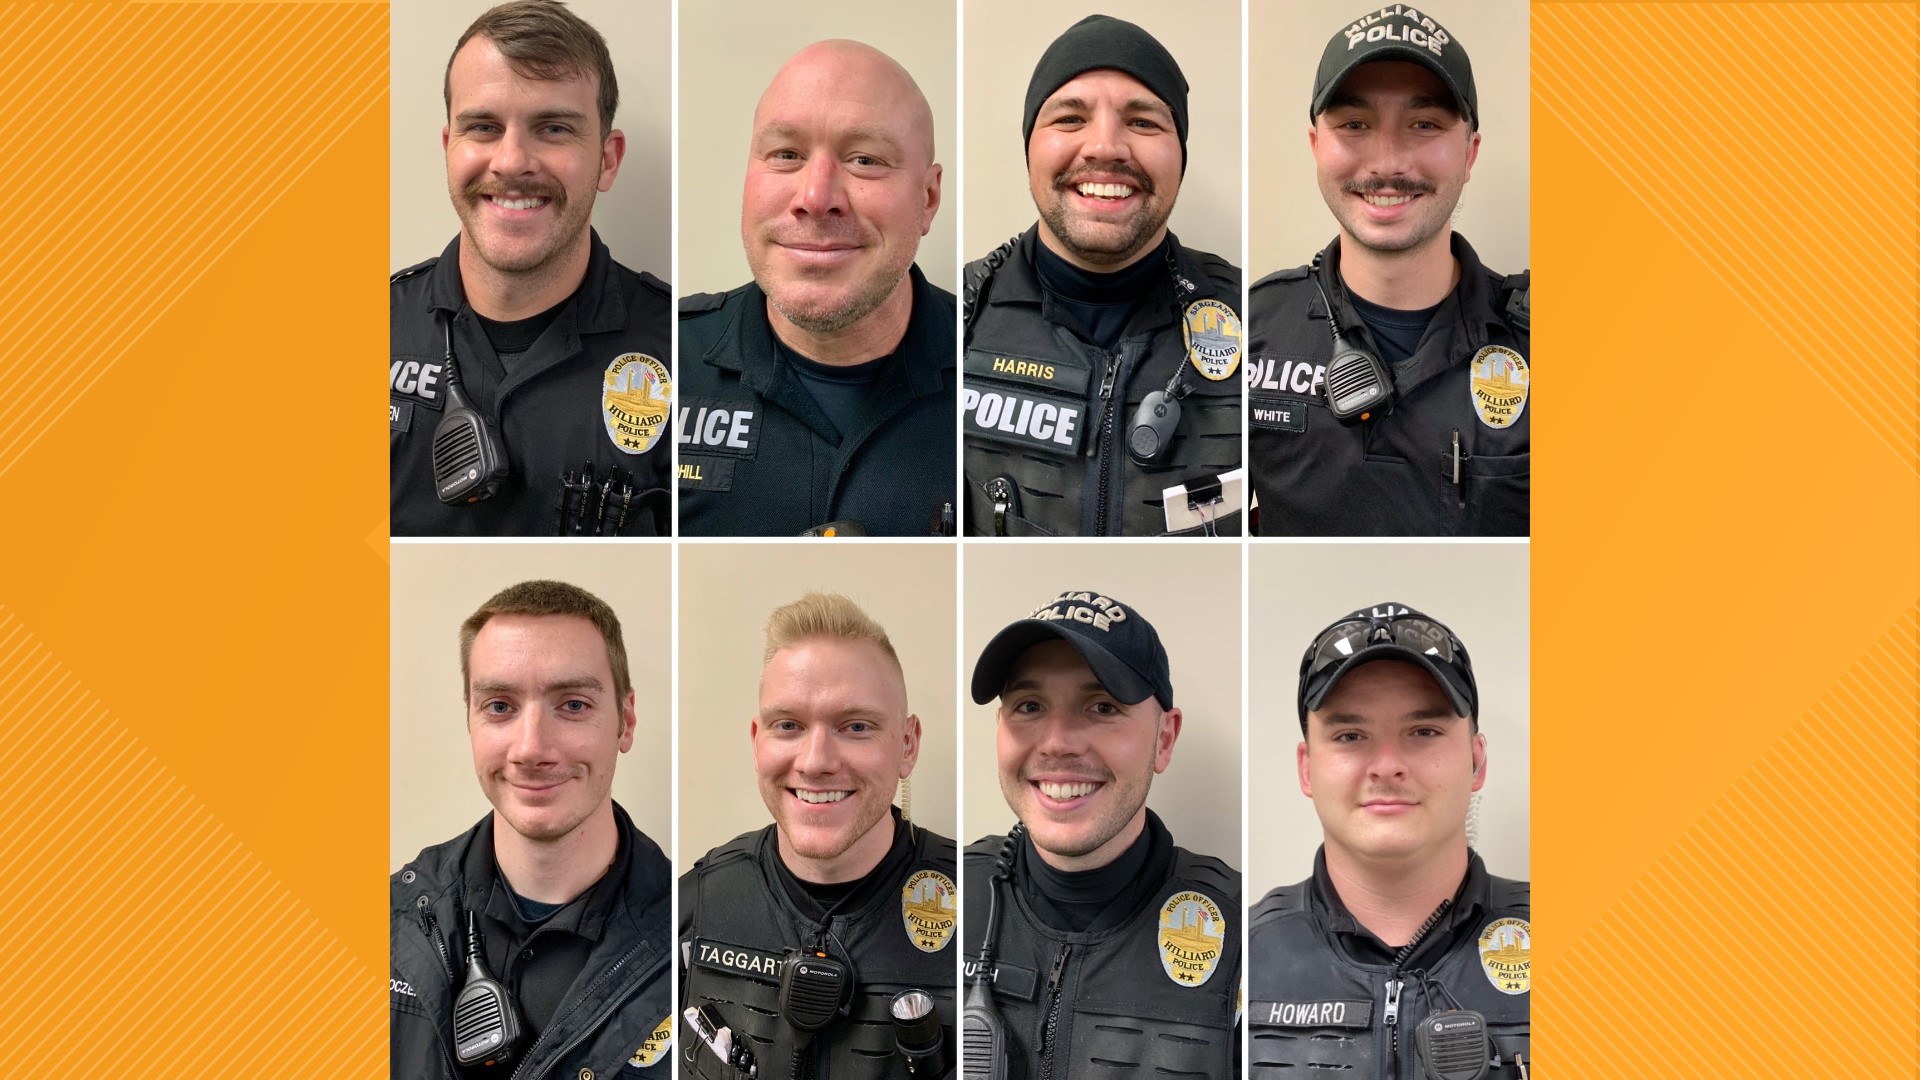 In a Facebook post by the Hilliard Division of Police, it was announced that officers are participating in what is called, "No-Shave November."